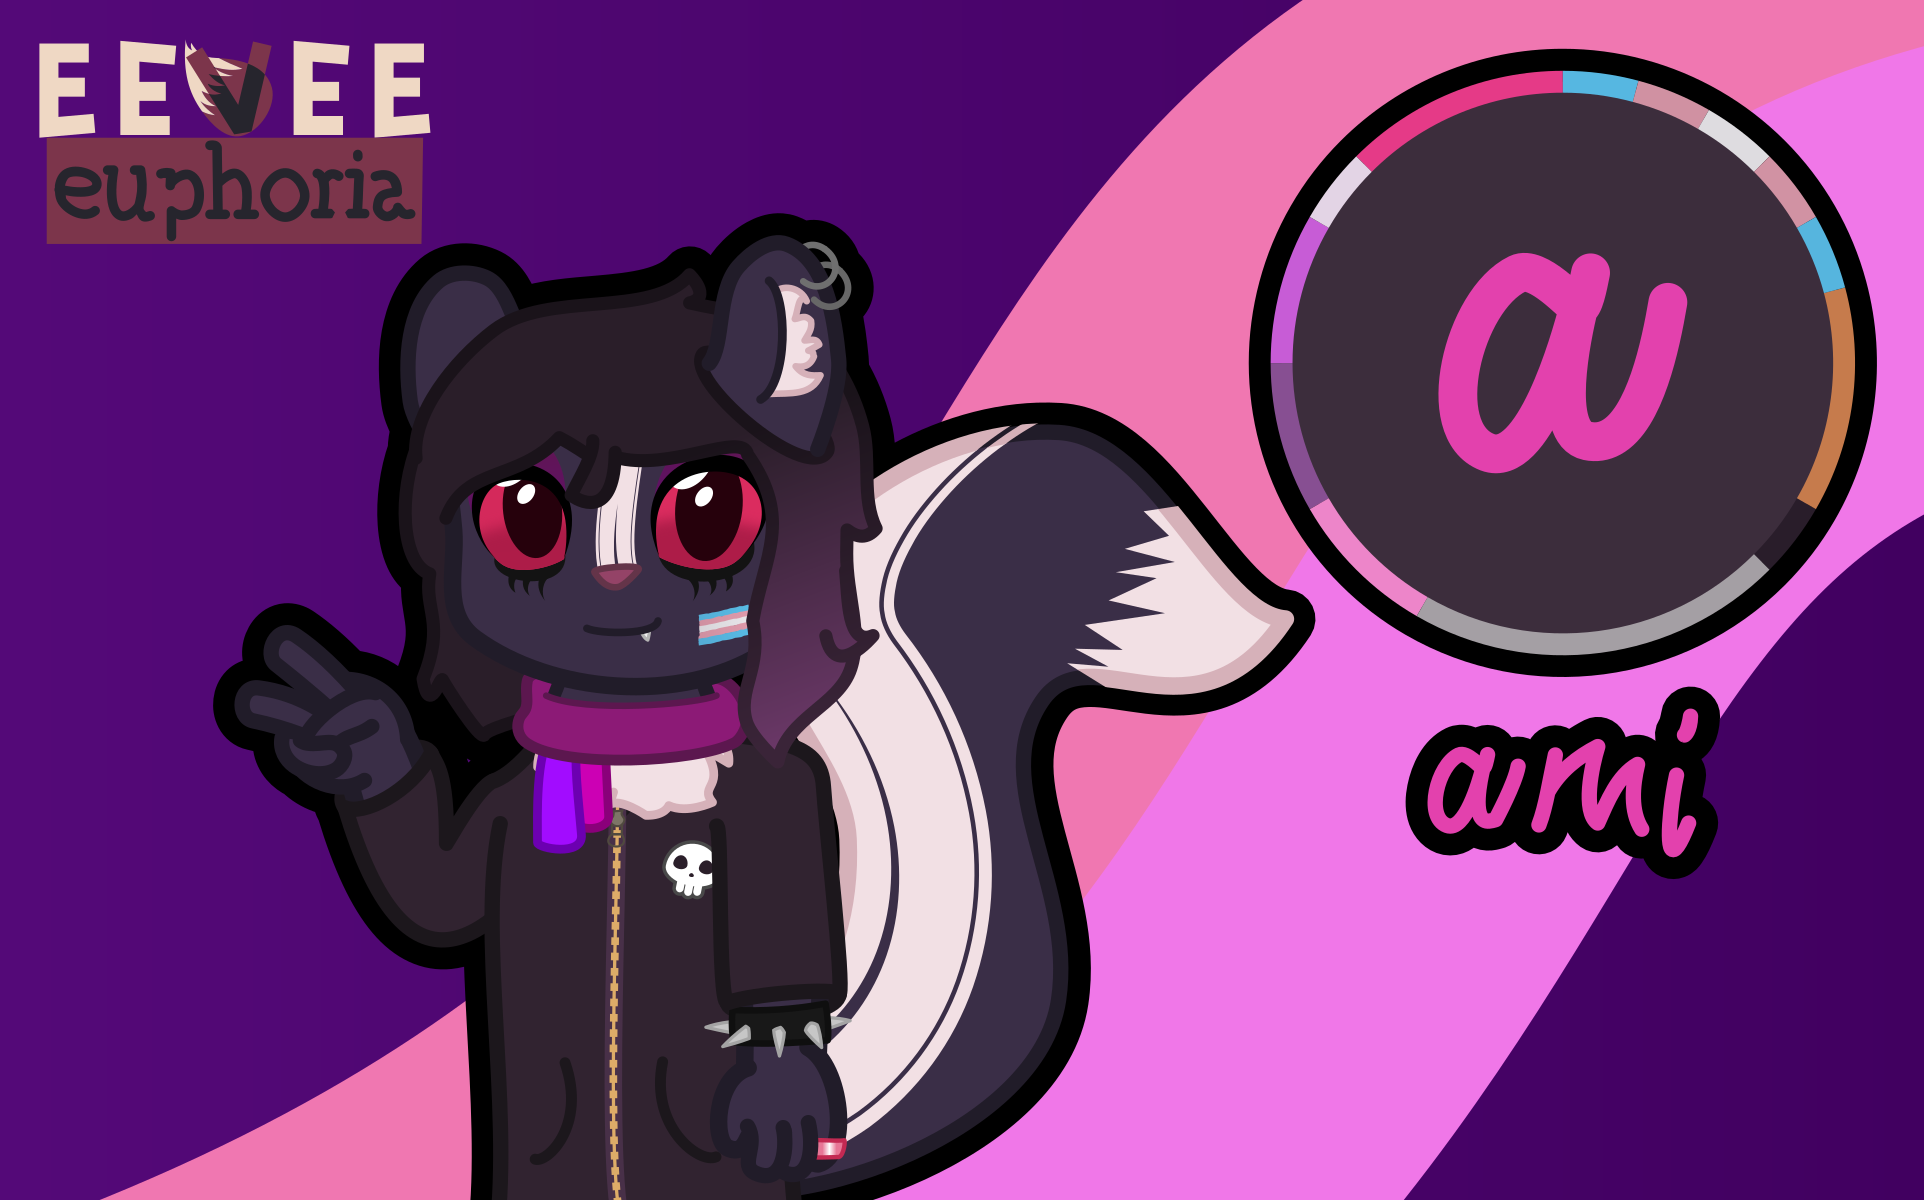 A punky gothic skunk gives you a slanted peace sign!